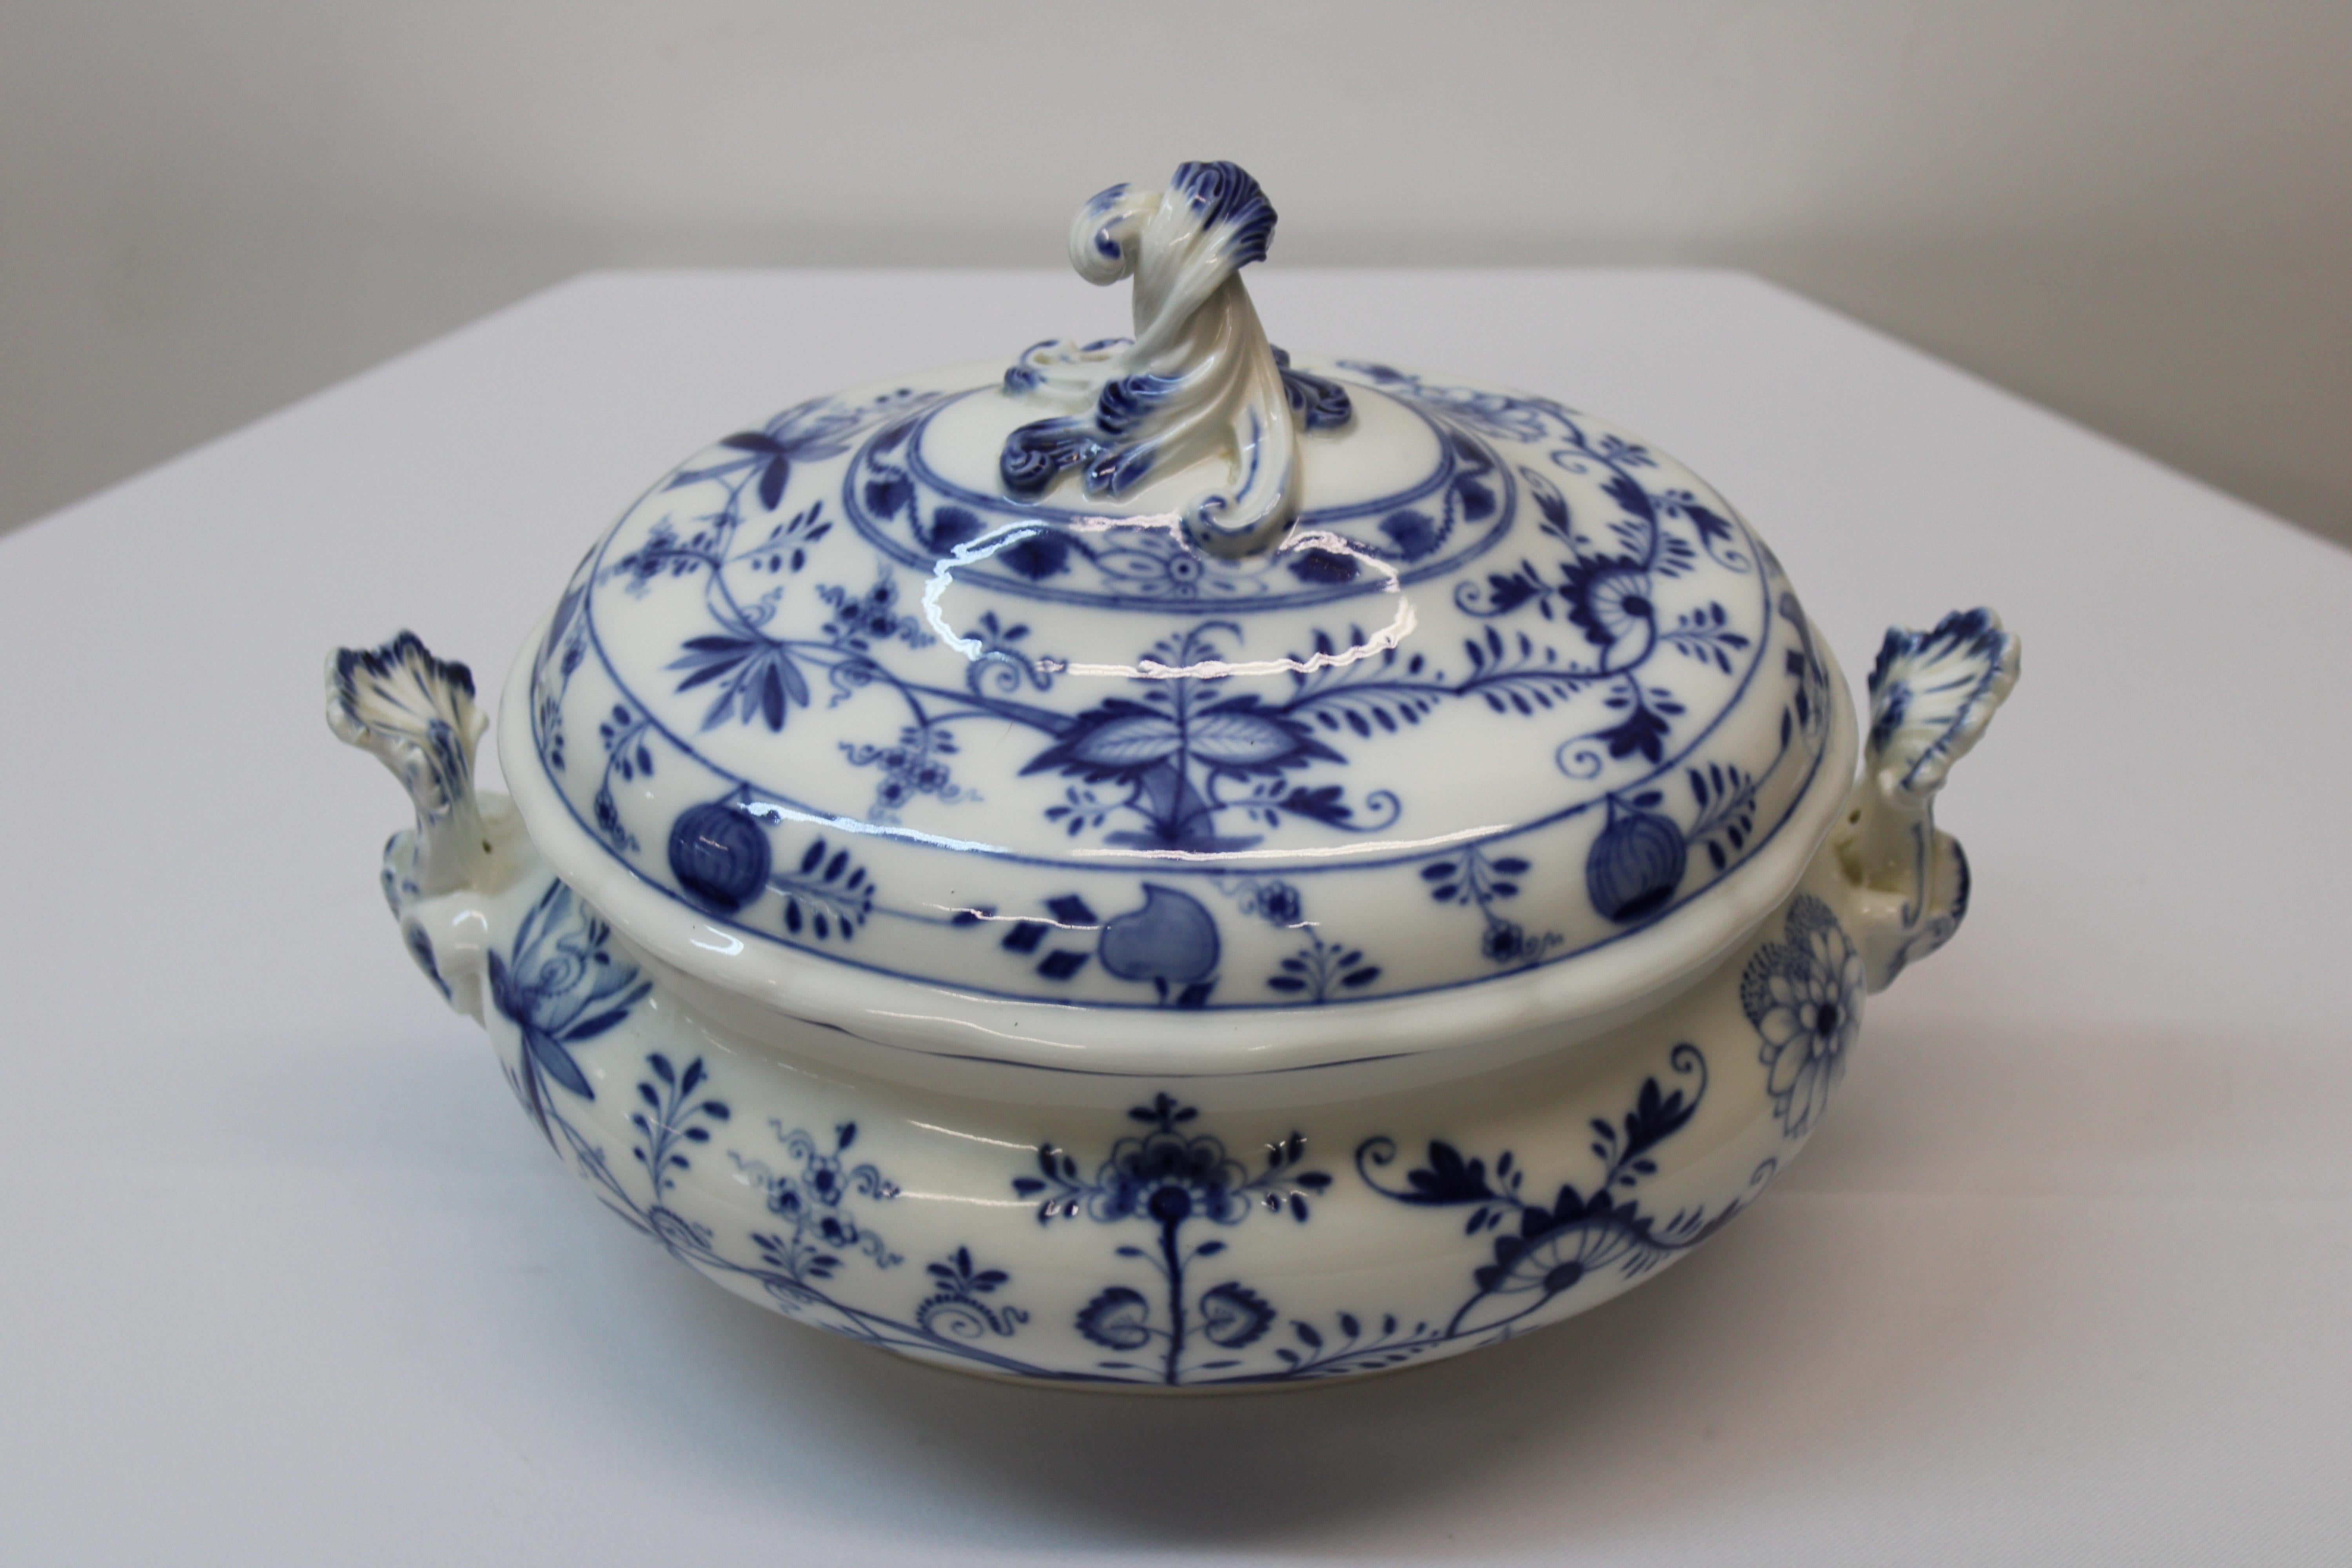 C. 19th Century

Meissen porcelain blue & white soup tureen (Made in Germany).